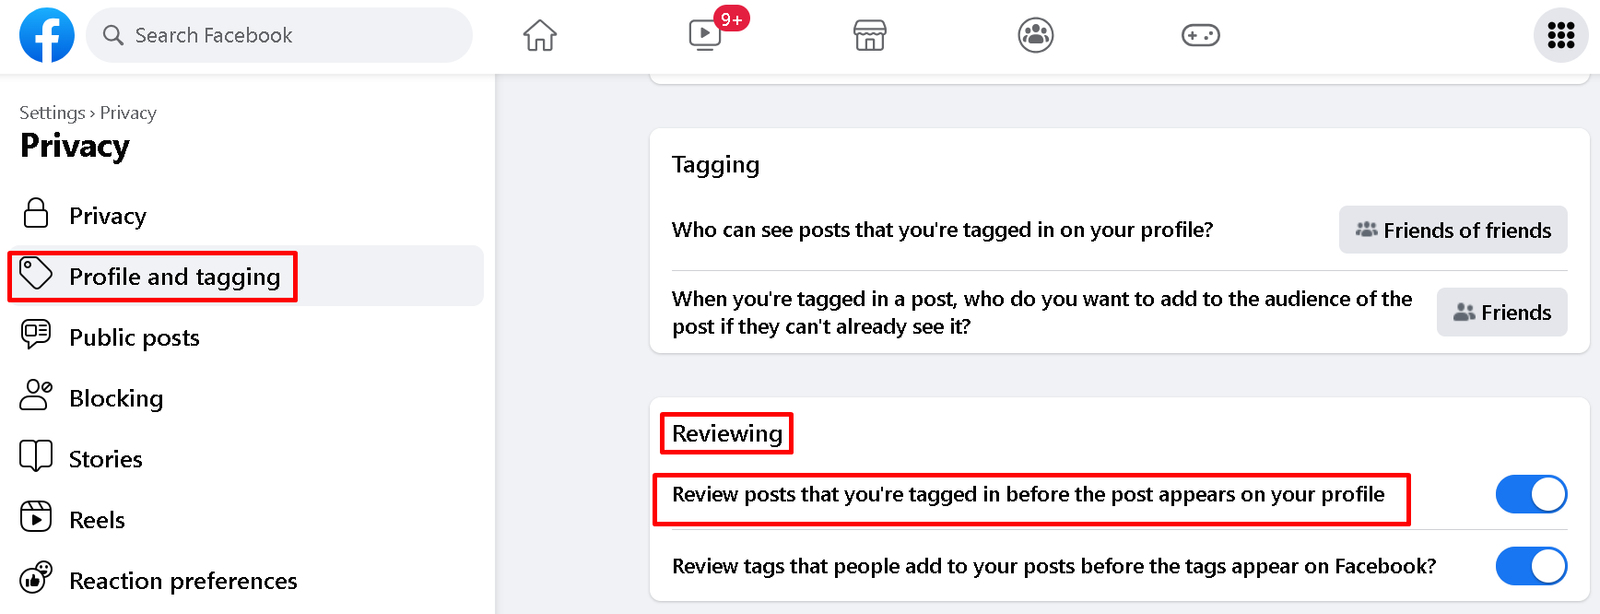 Review posts that you are tagged in